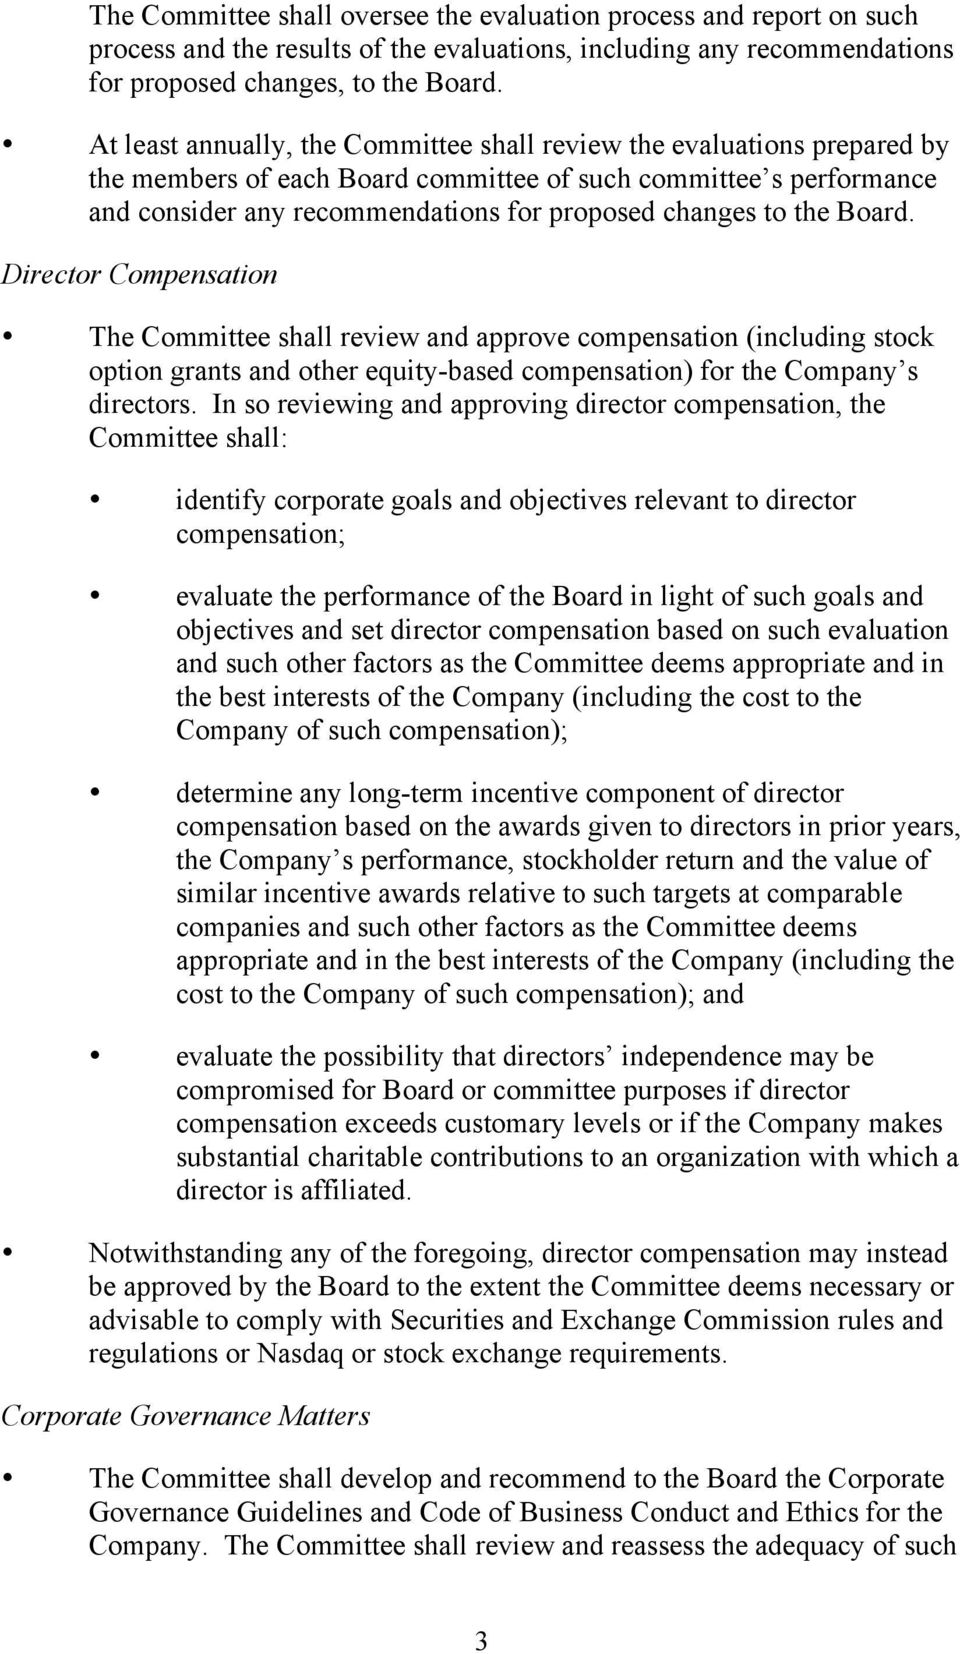 the Board. Director Compensation The Committee shall review and approve compensation (including stock option grants and other equity-based compensation) for the Company s directors.